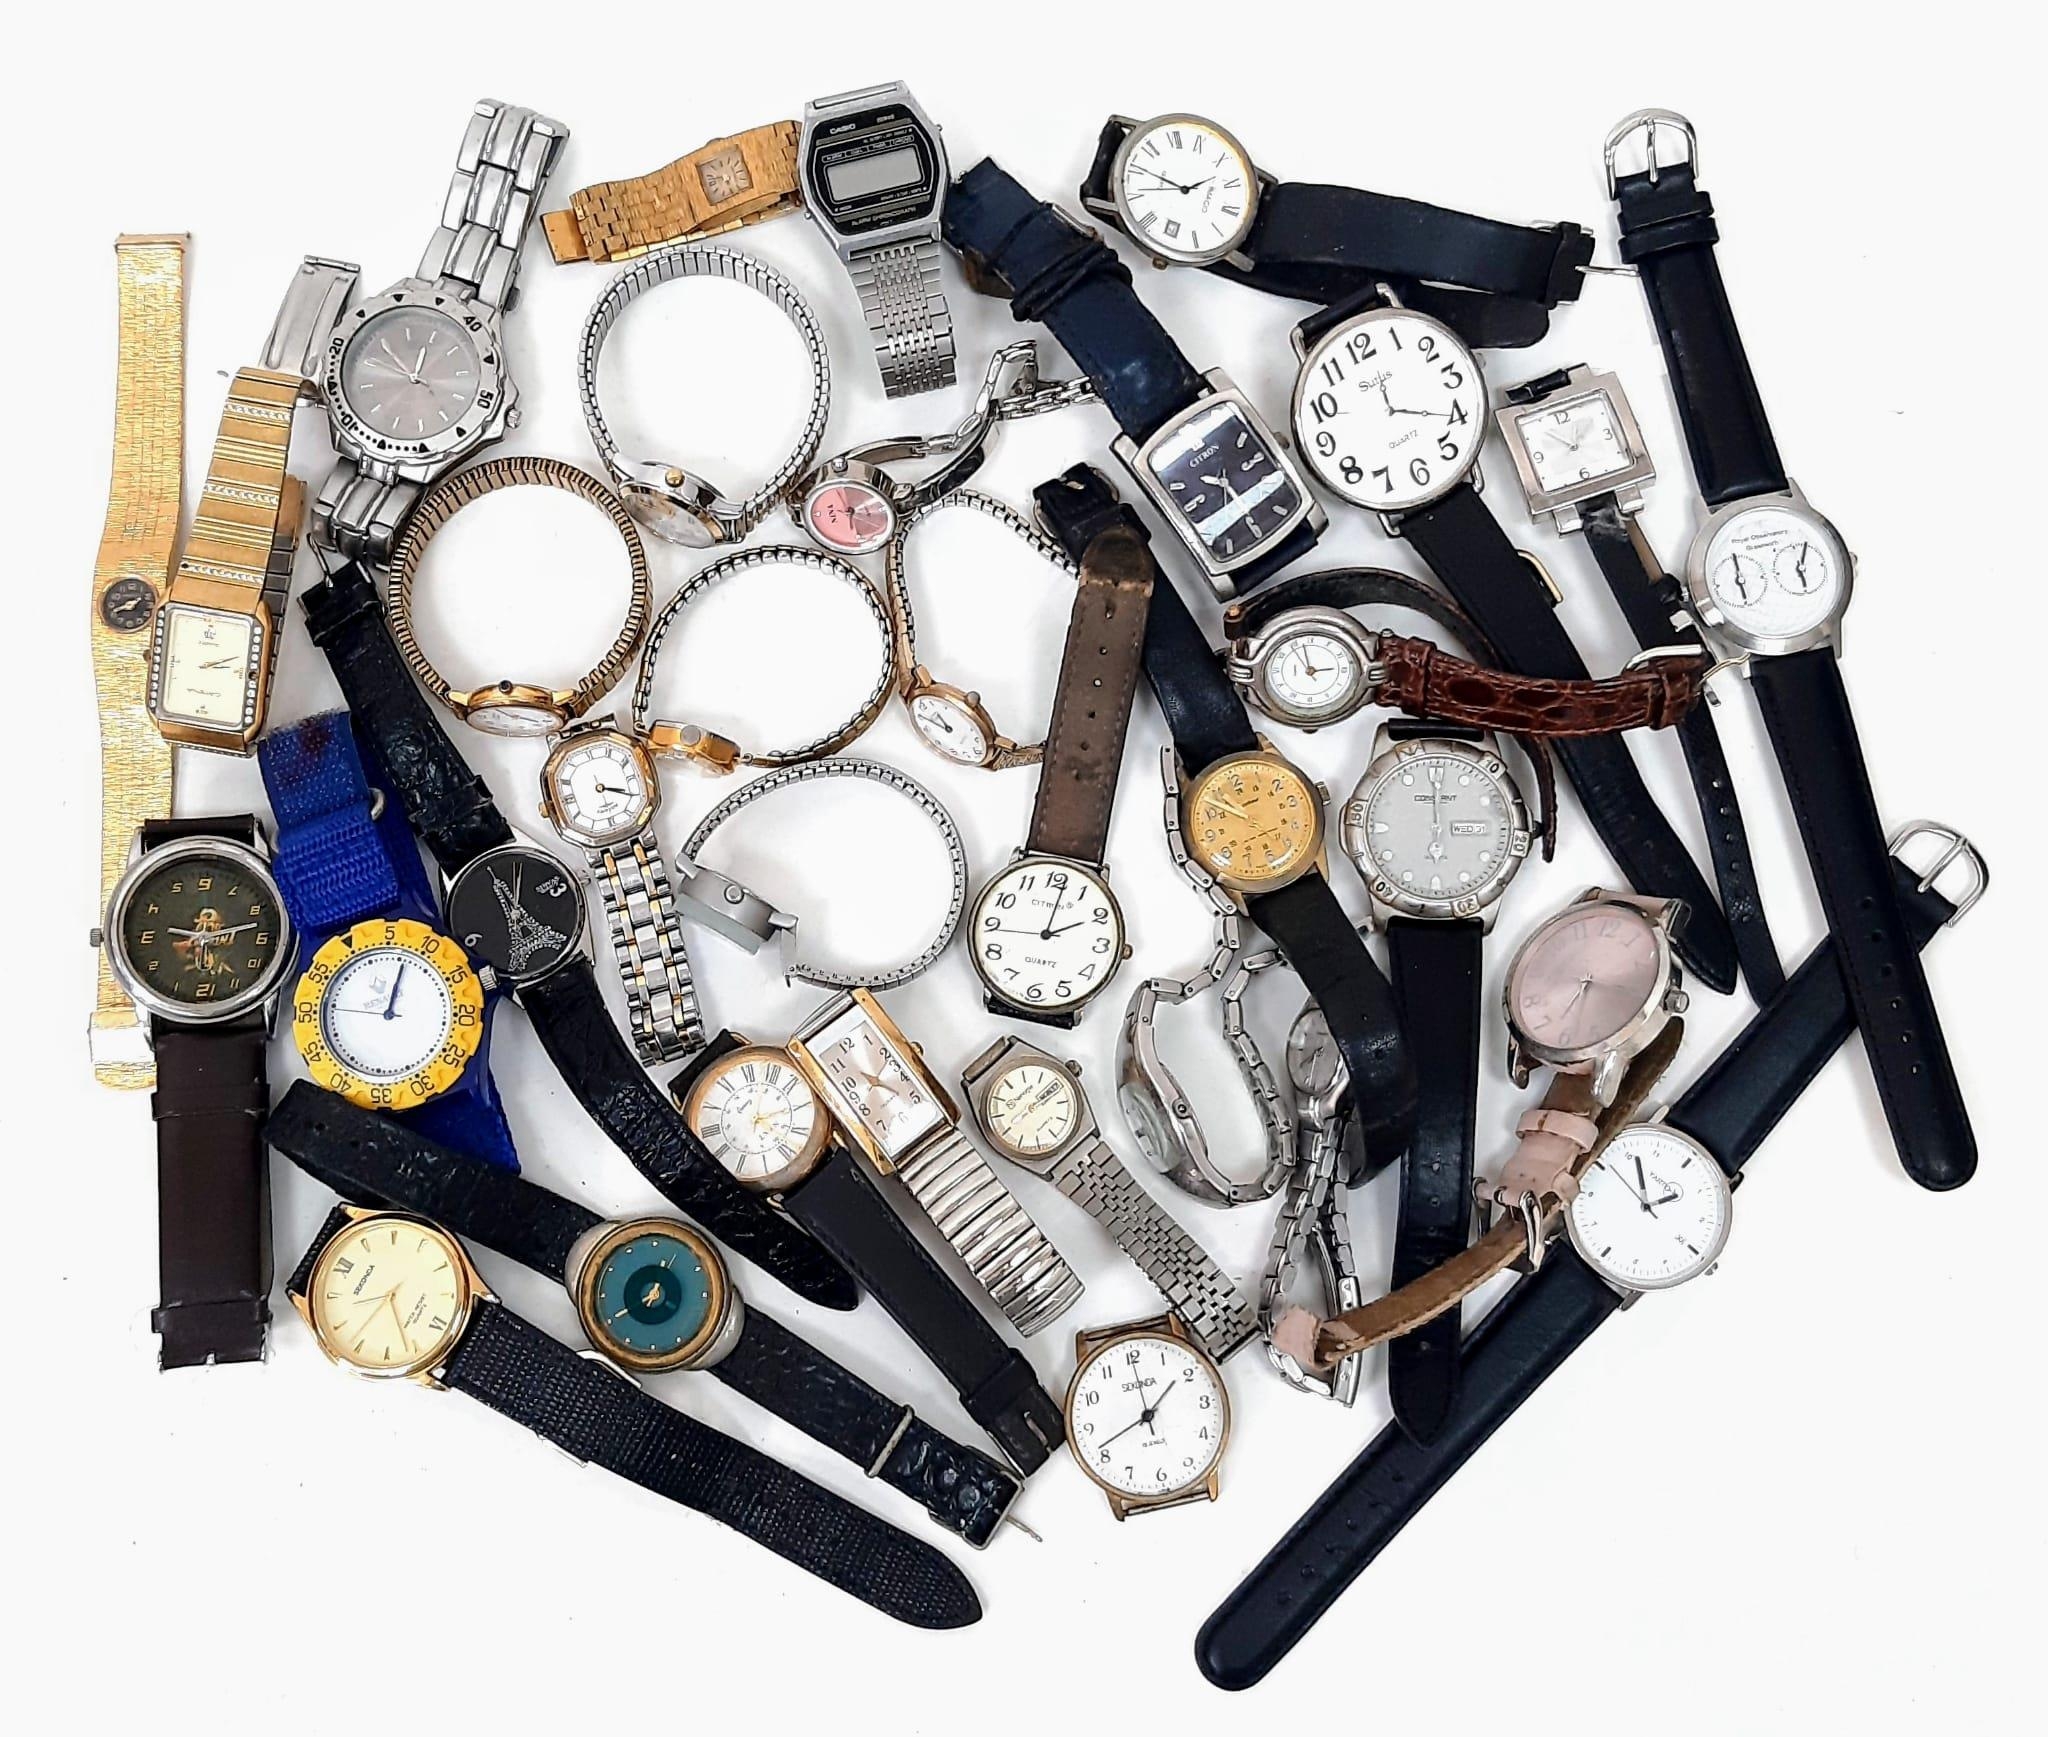 A Collection of 32 Gents and Ladies Watches - Includes Rotary, Sekonda and Casio brands. Most in